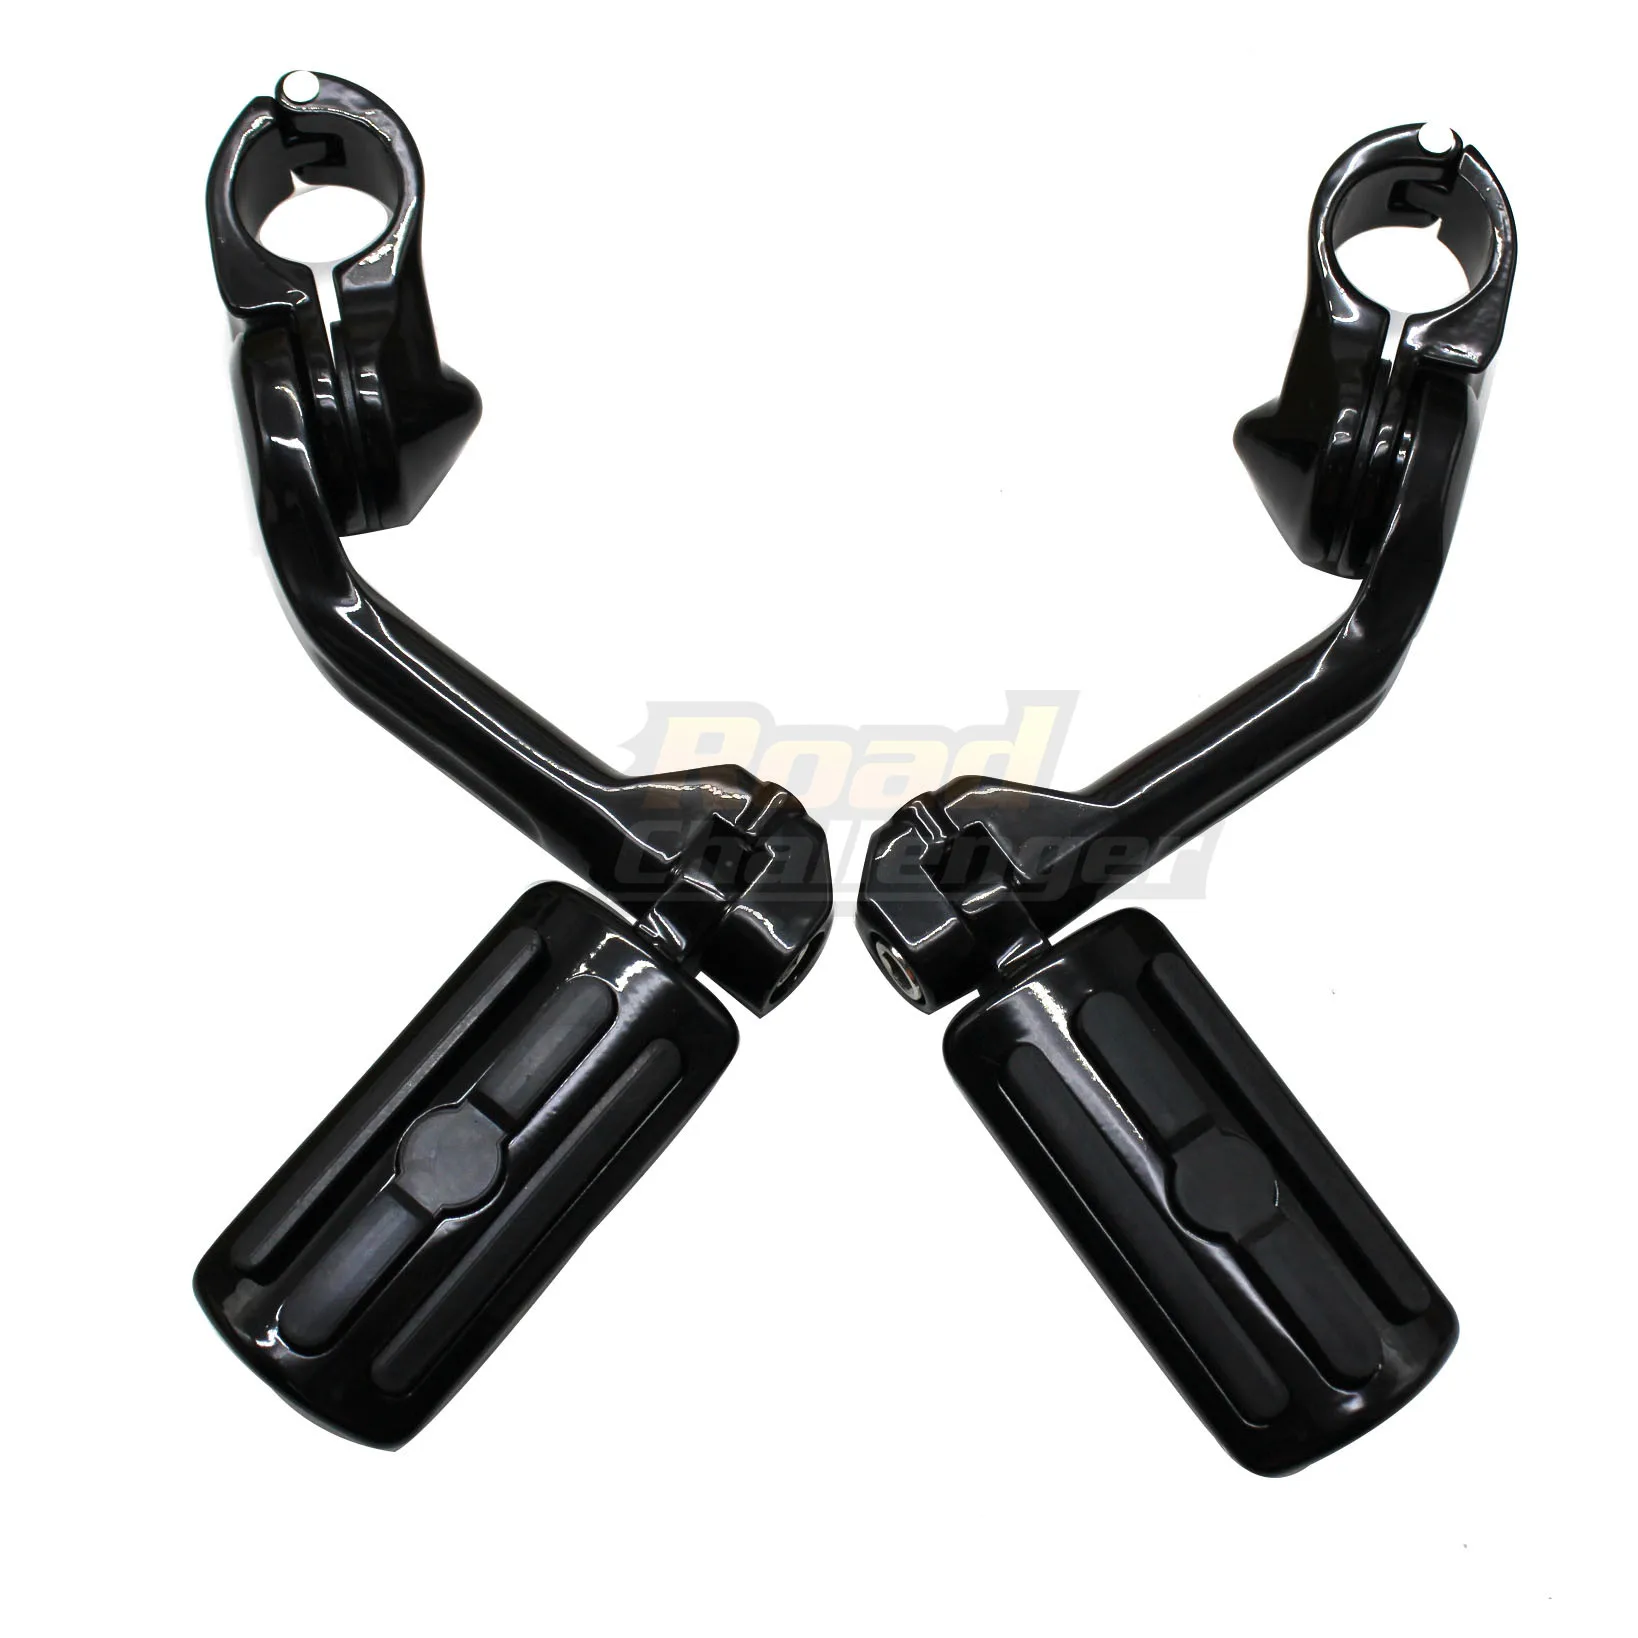 Motorcycle Foot Rests Long Angled Highway Engine Guard 1-1/4" 32mm Footpeg For Harley Electra Glide Road Glide - Цвет: type 1